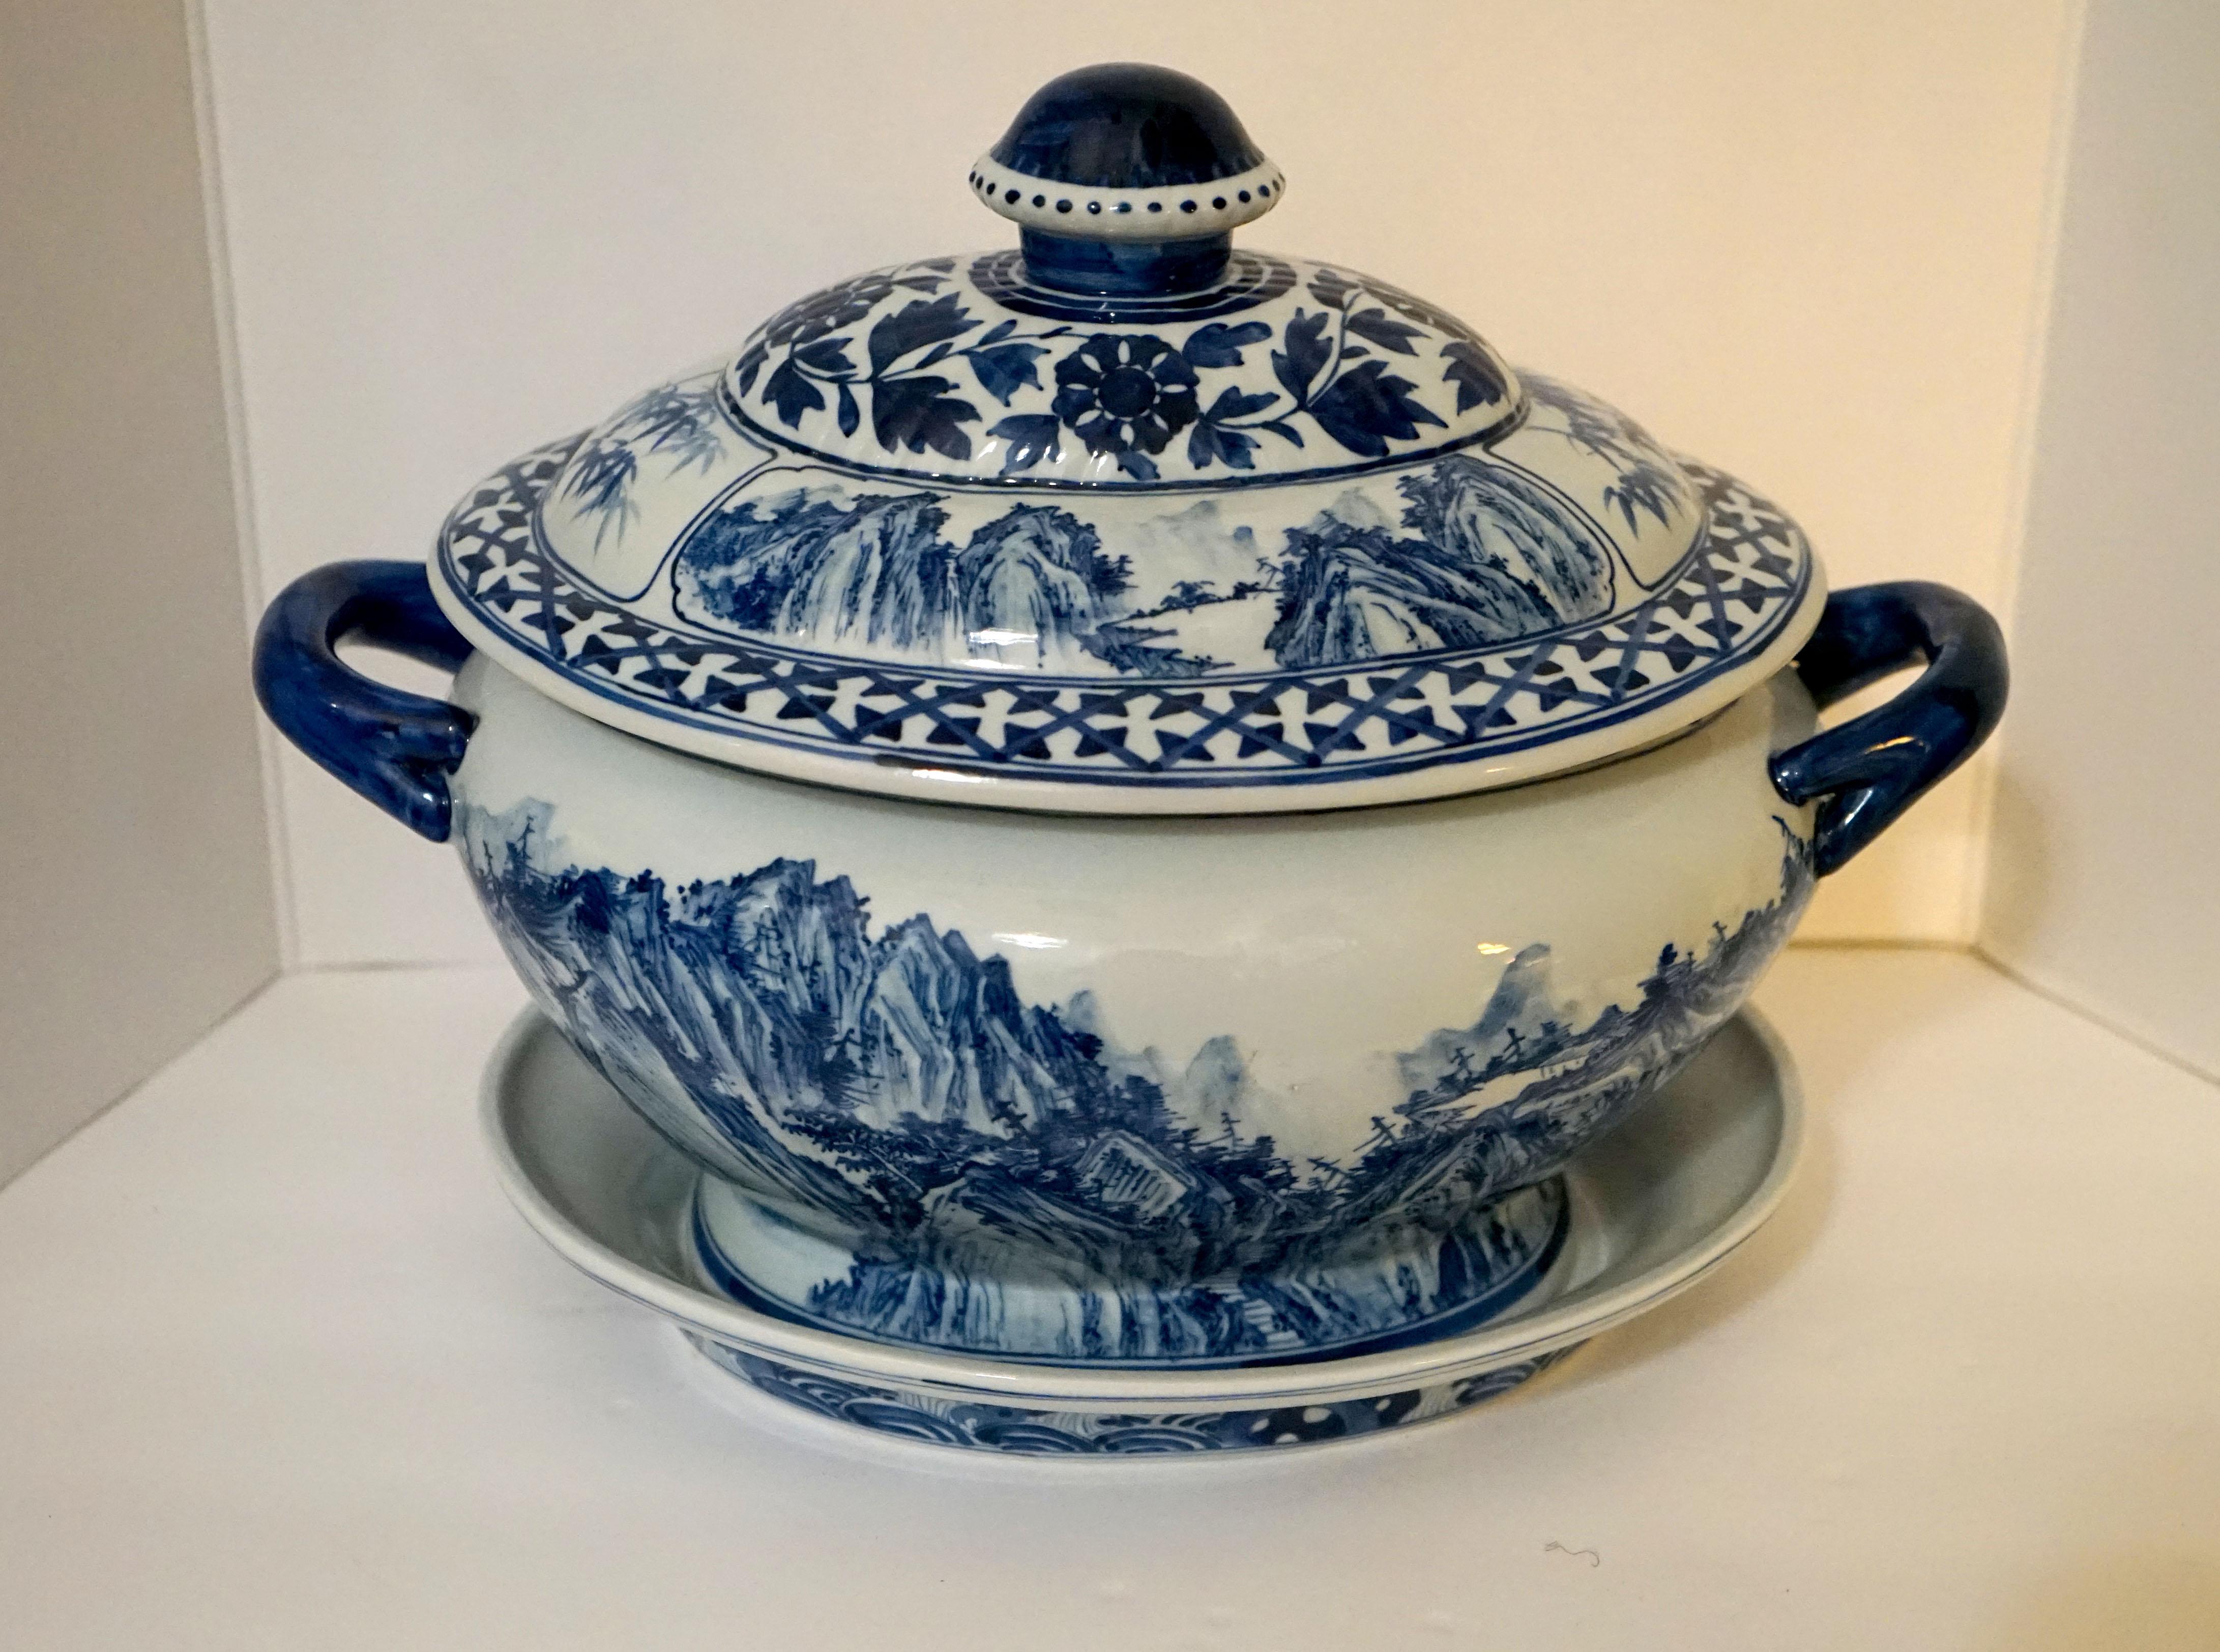 The flavor of the soup may become secondary to this marvelous covered tureen cover and liner, perfect for guests or simply soup for two. A soup tureen so compelling you could lose yourself in the mountains, trees and other designs of the bowl as you